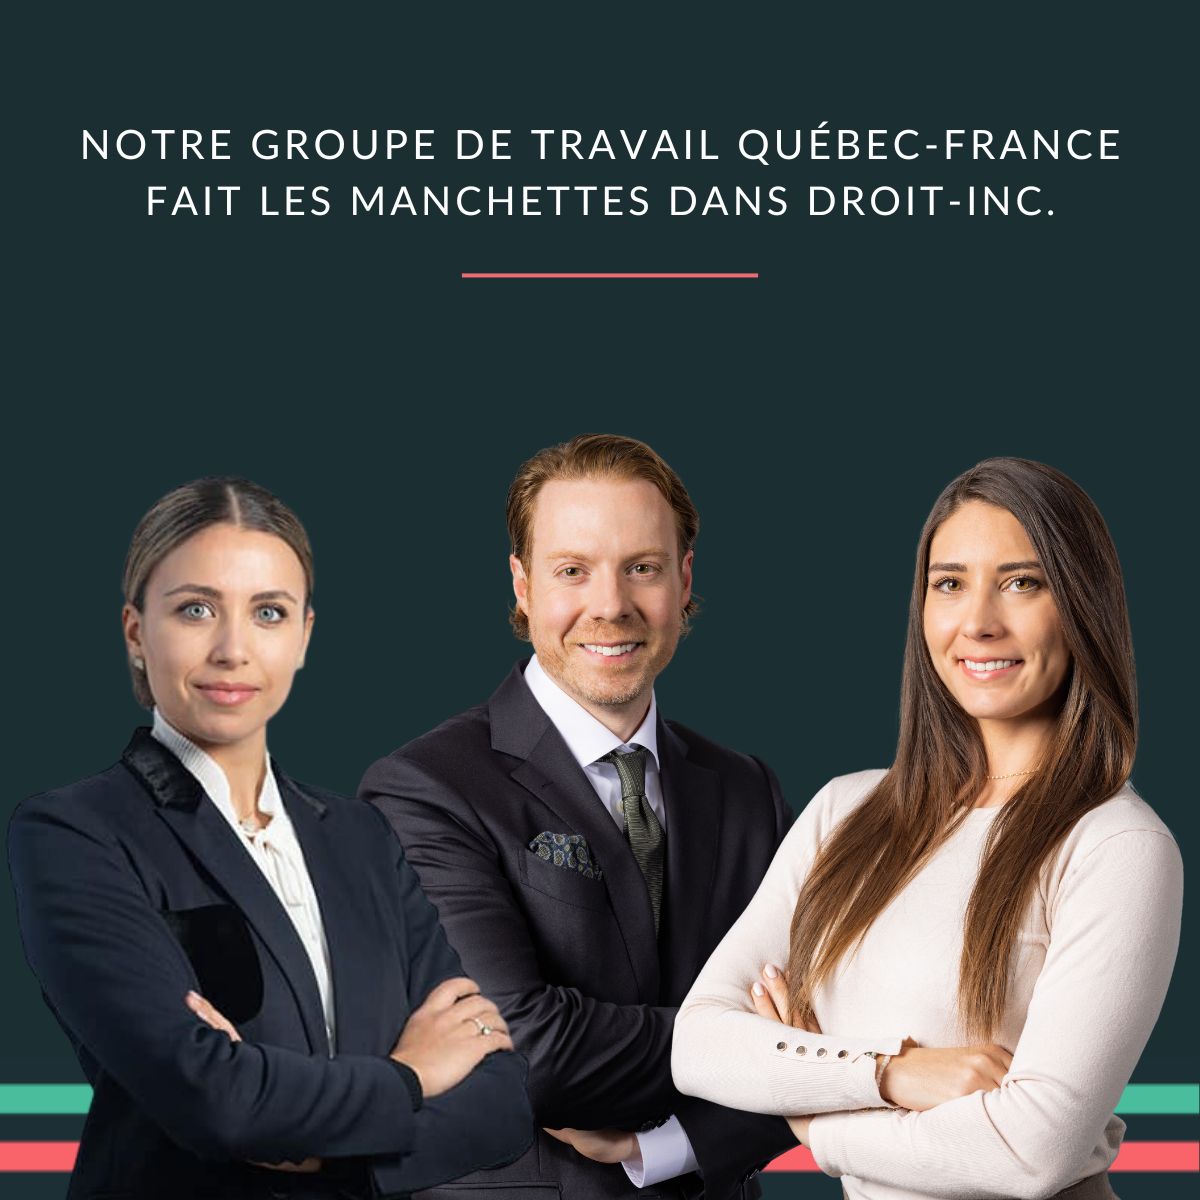 Interview: The new Quebec-France working group attracts the attention of Droit-inc.